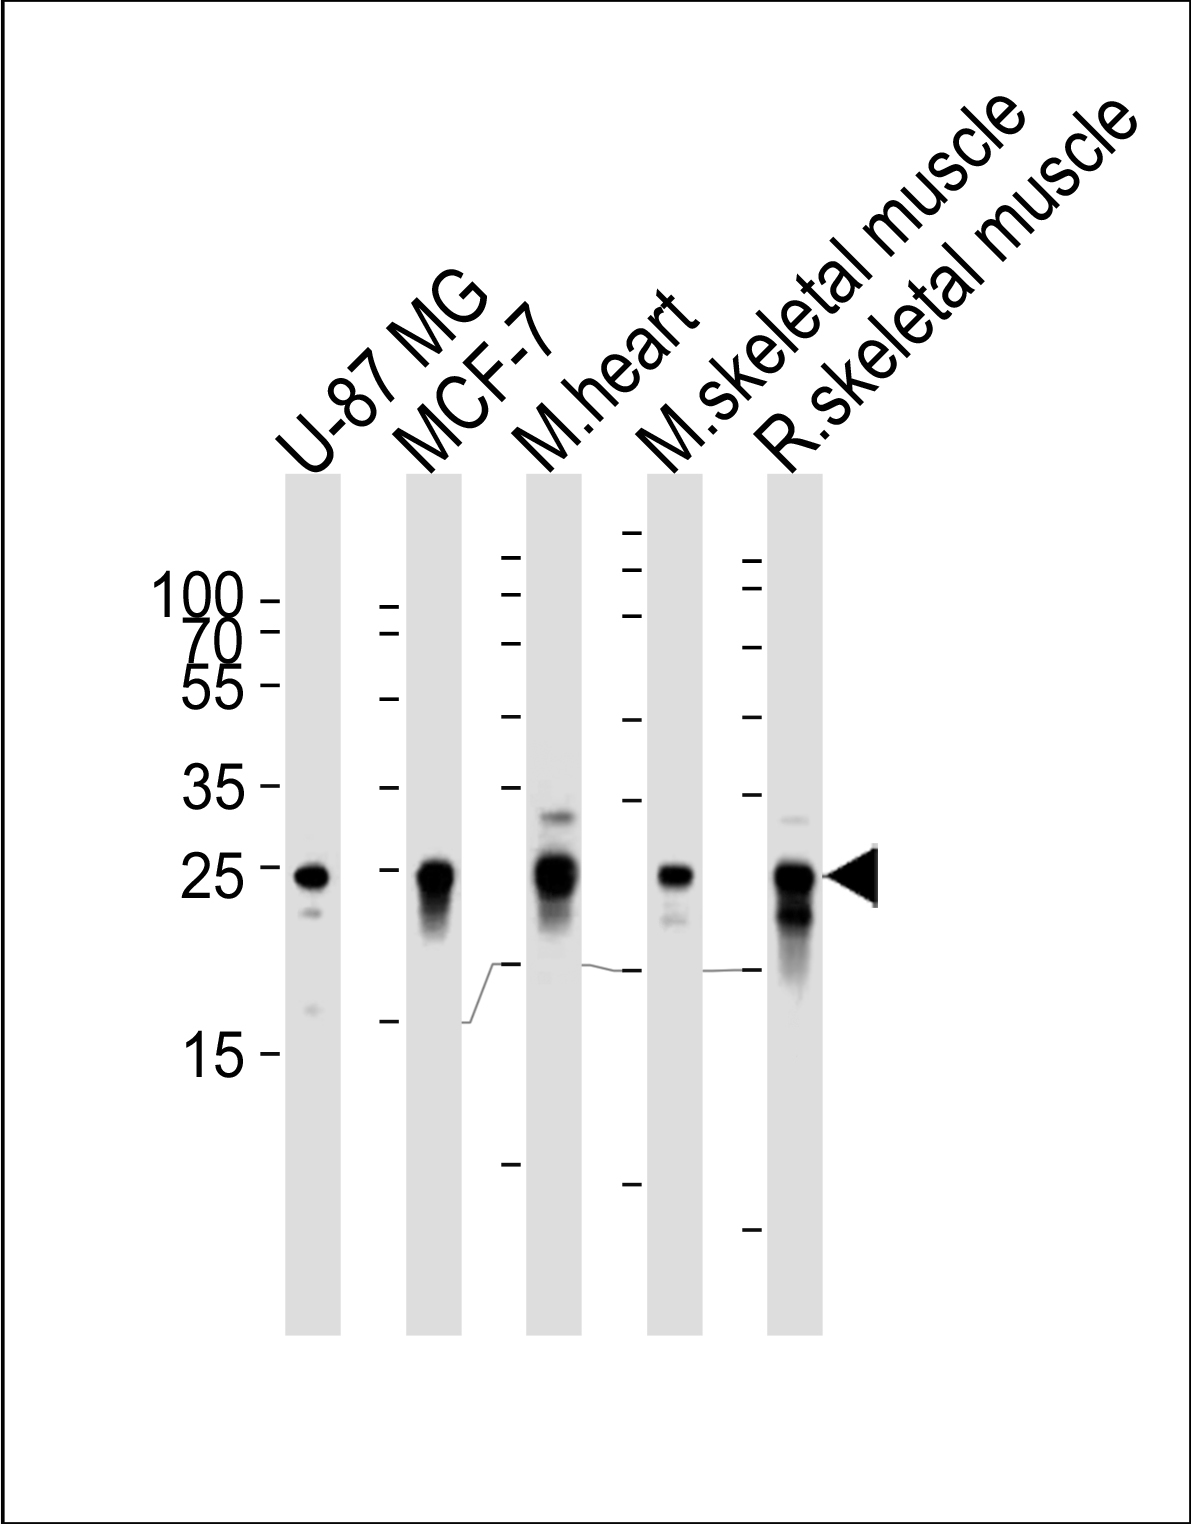 Western blot analysis of lysates from U-87 MG,  MCF-7 cell line,  mouse heart and skeletal muscle,  rat skeletal muscle tisue lysates (from left to right),  using CRYAB Antibody(Cat.  #AM8424b).  AM8424b was diluted at 1:1000 at each lane.   A goat anti-mouse IgG H&L(HRP) at 1:3000 dilution was used as the secondary antibody.  Lysates at 35?g per lane.